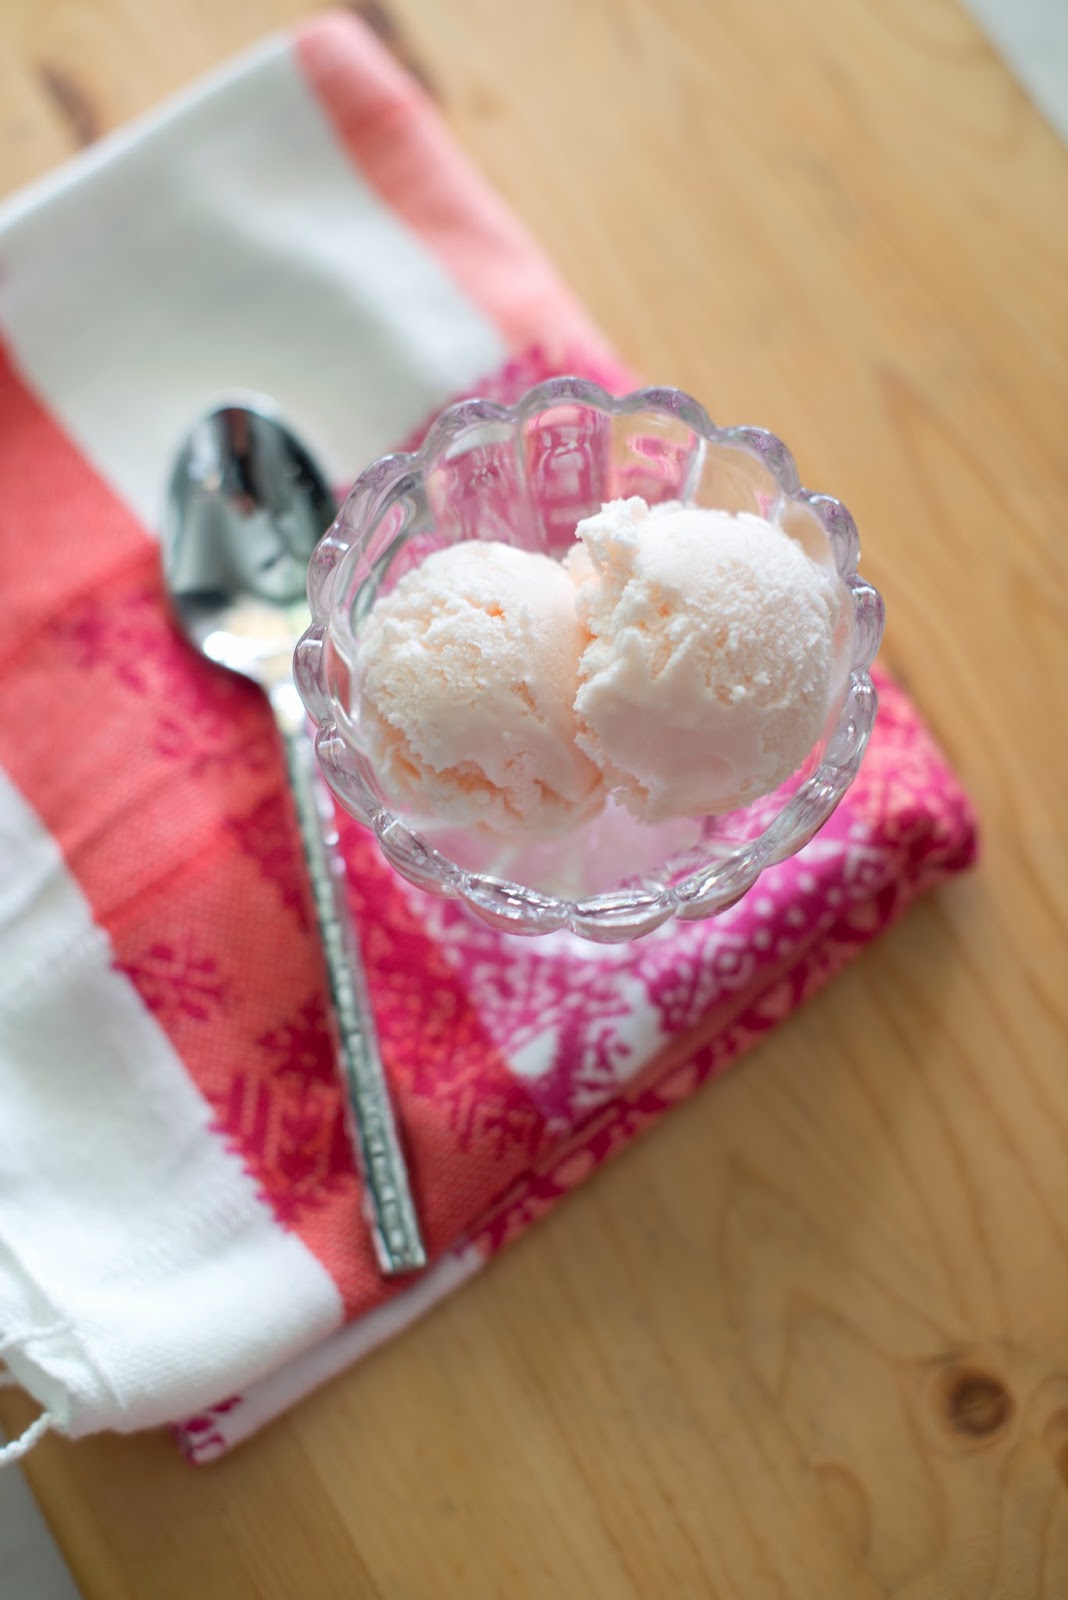 Homemade Reduced Fat Strawberry Ice Cream Recipe--all the flavor of homemade ice cream without all the fat!